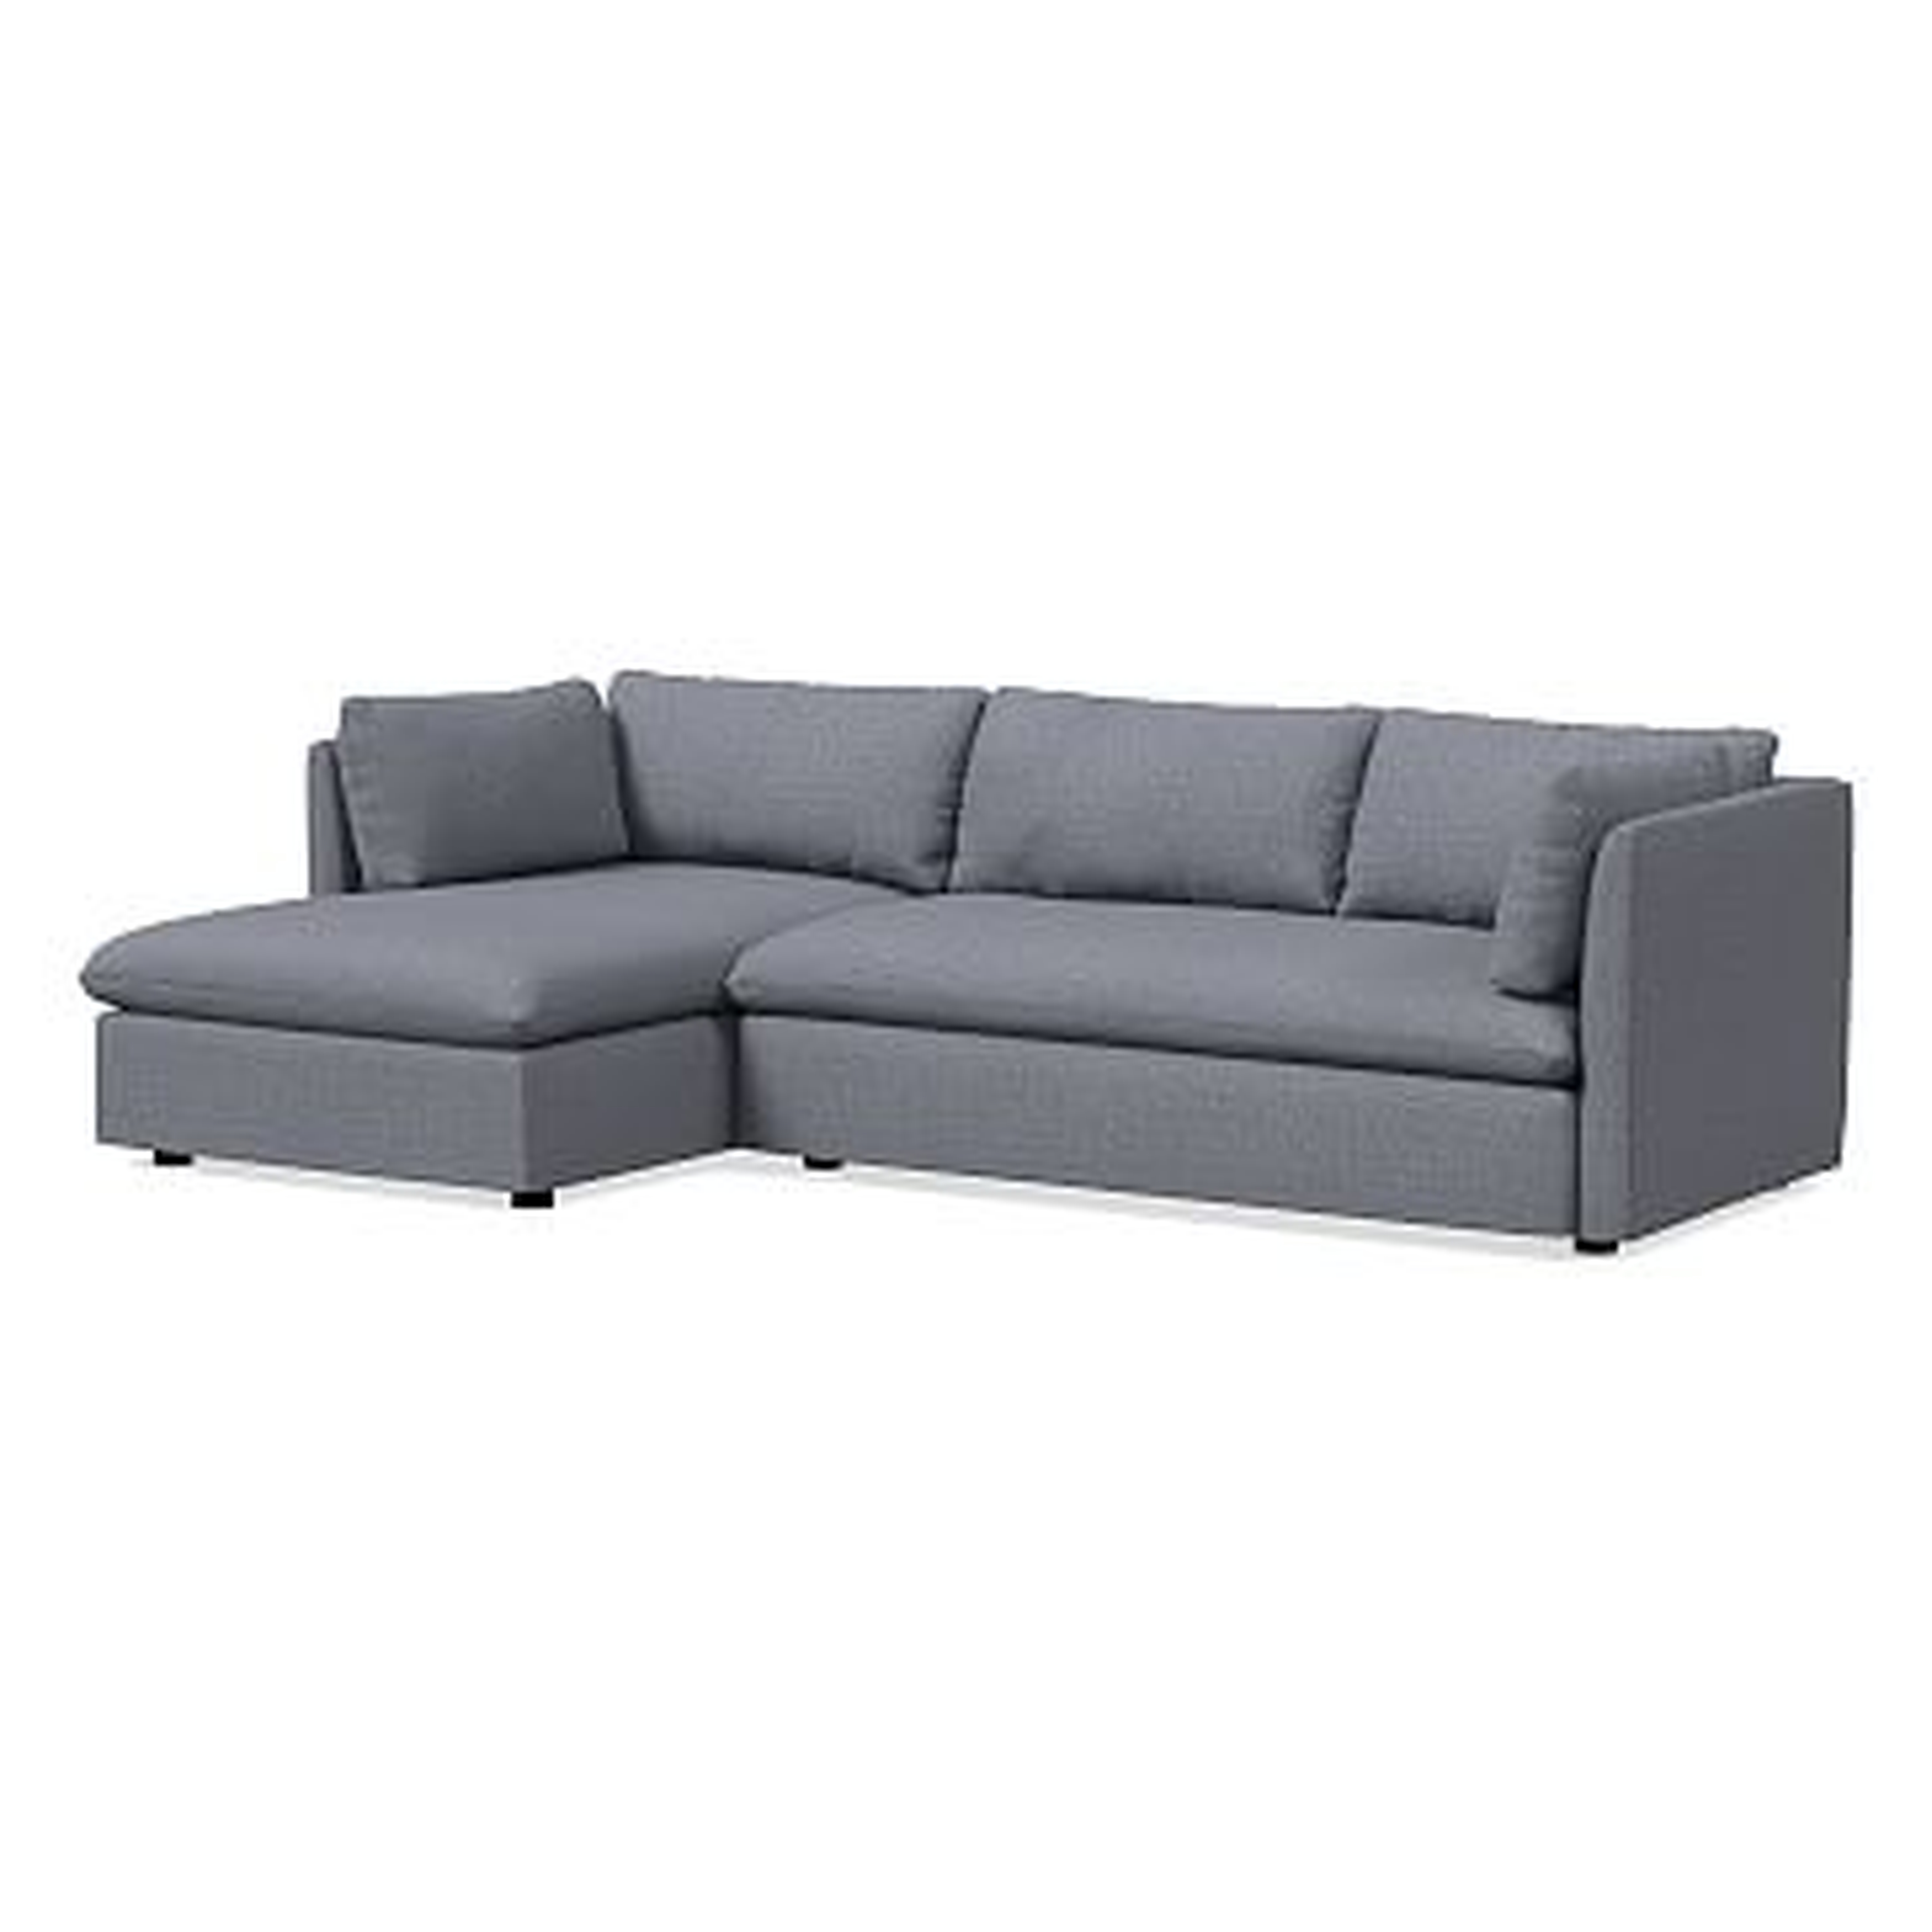 Shelter Sectional Set 05: Right Arm 2.5 Seater Sofa, Left Arm Chaise, Poly, Yarn Dyed Linen Weave, Graphite, Concealed Support - West Elm